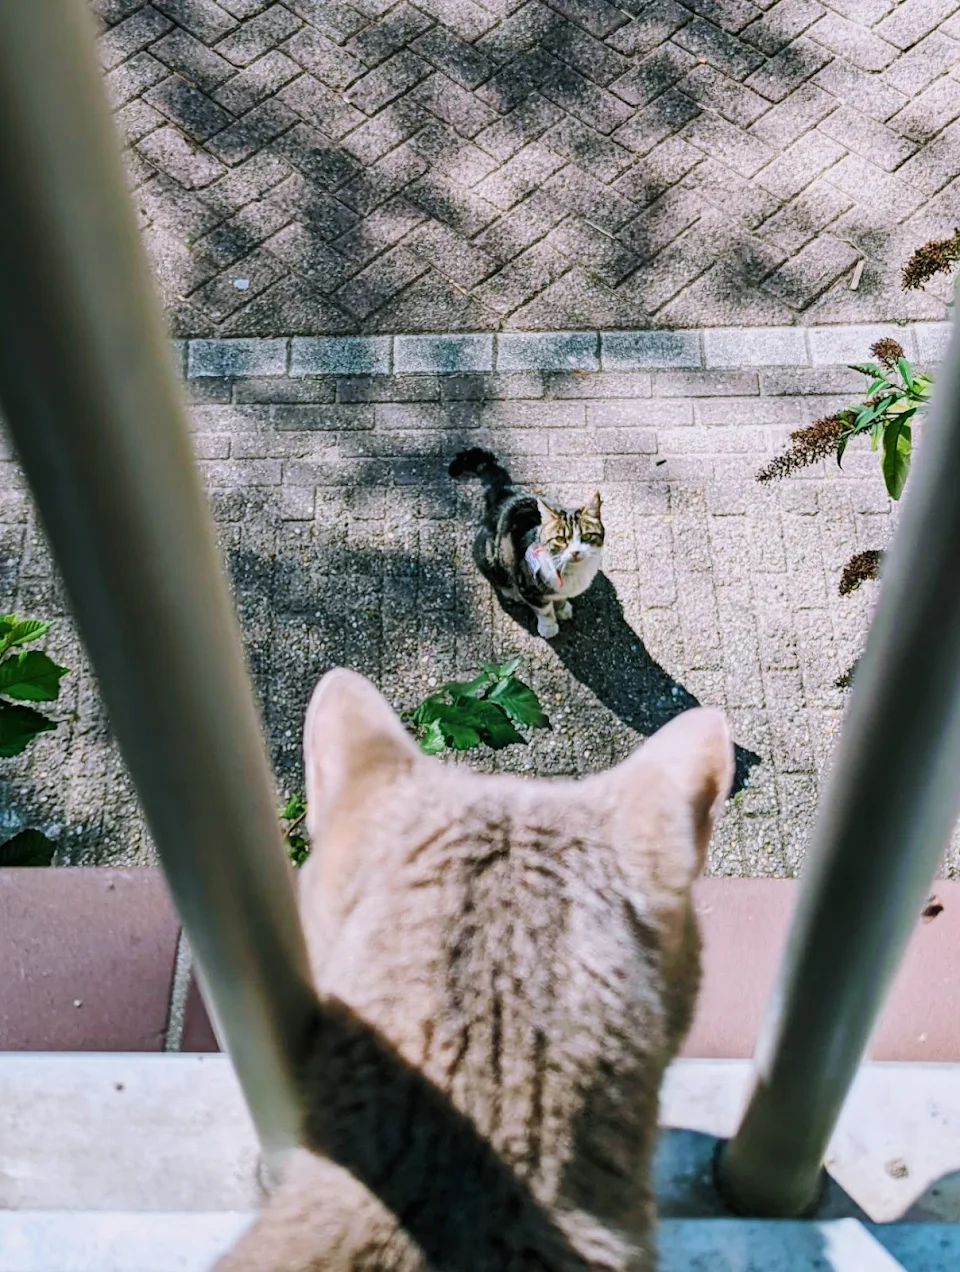 Neighbor's (free) cat visits our (not-so-free) cat (behind the bars)